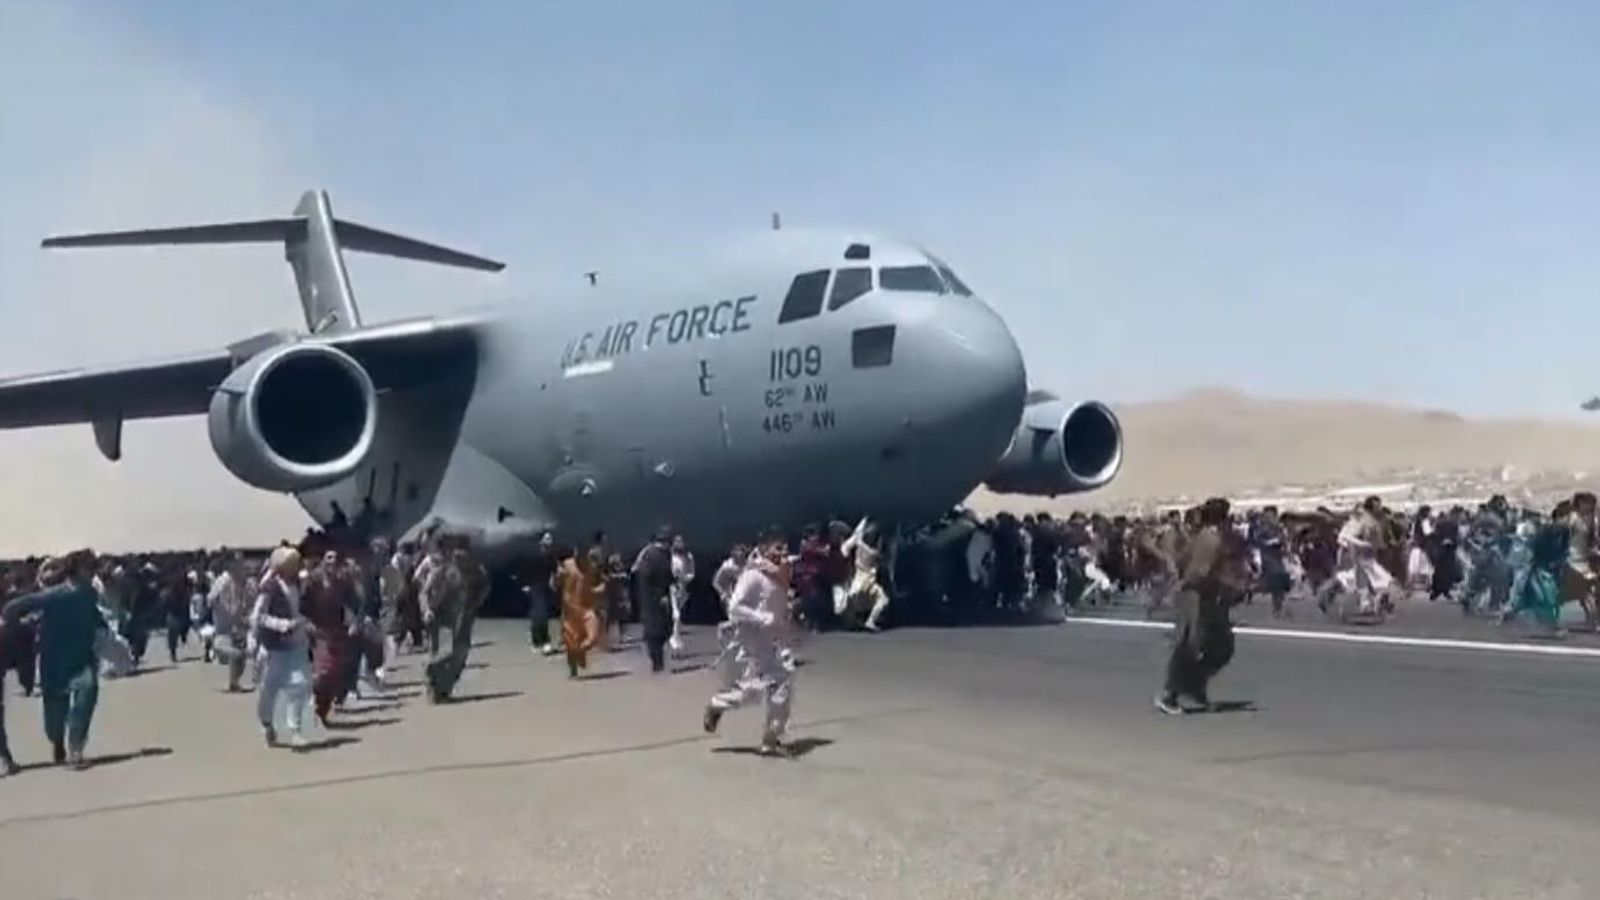 Human remains found in wheel well of US military plane after Kabul airport chaos - PakkiKhabar